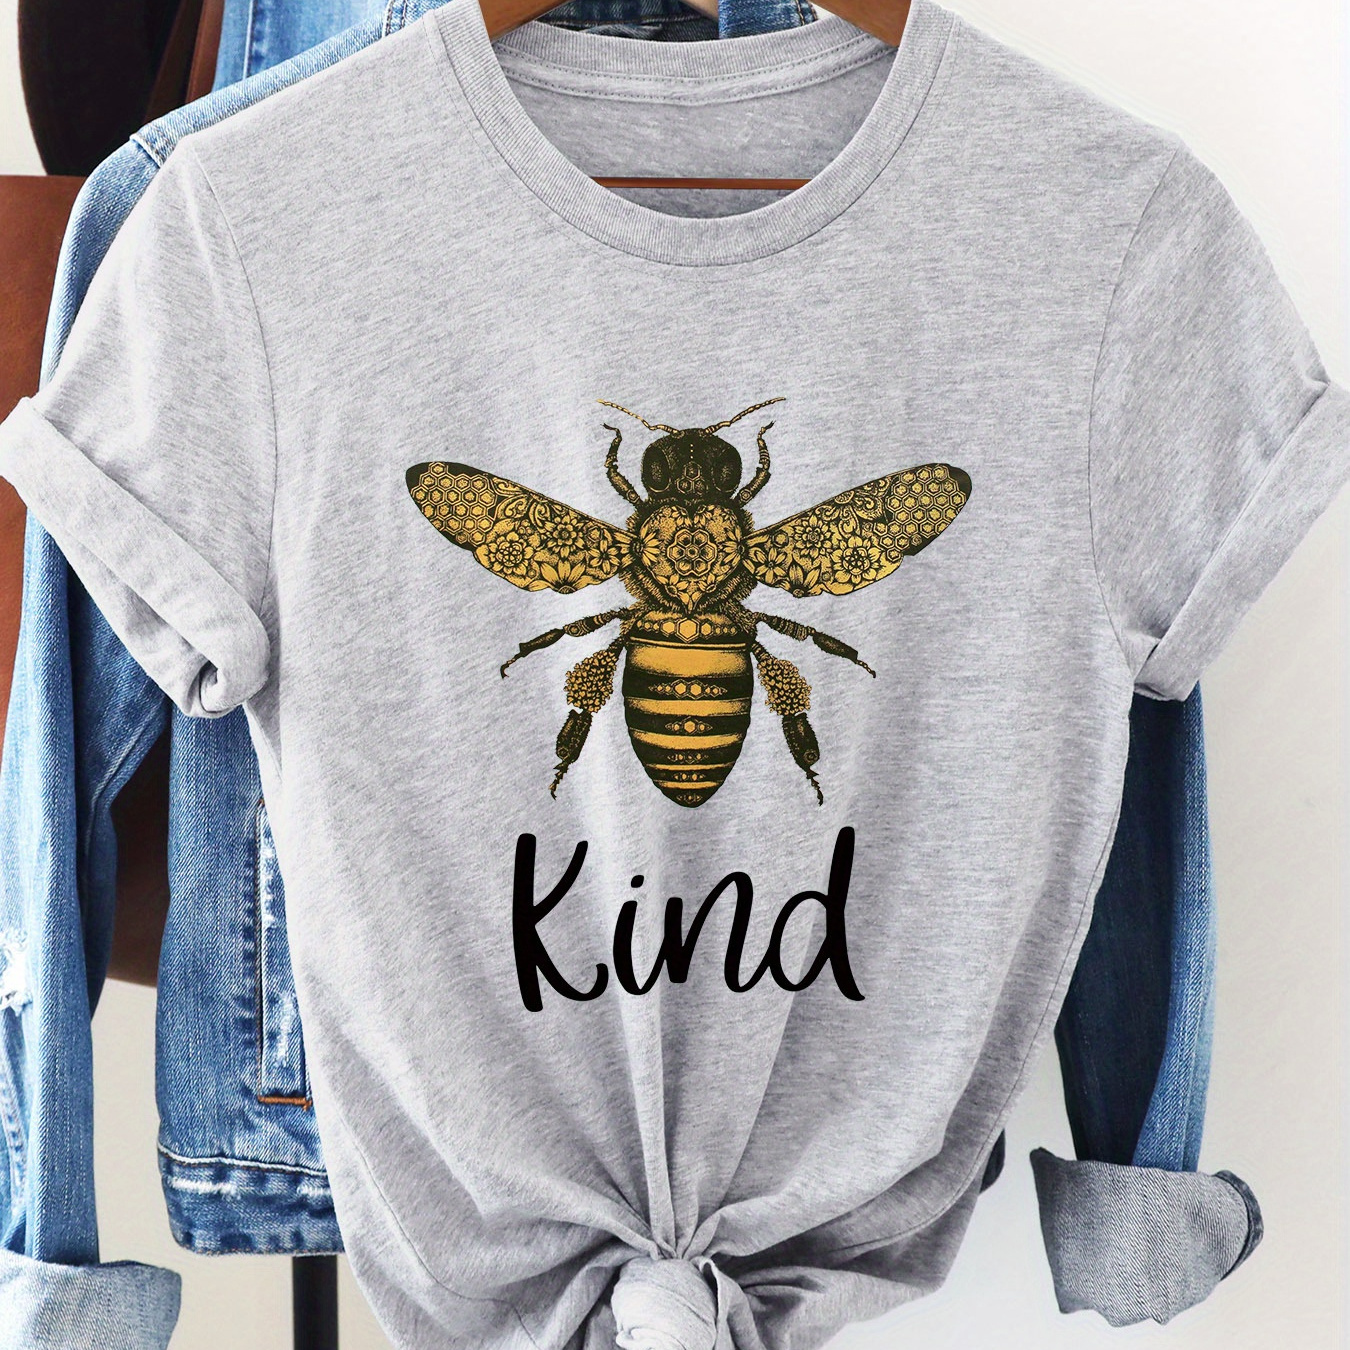 

Bee Print T-shirt, Short Sleeve Crew Neck Casual Top For Summer & Spring, Women's Clothing